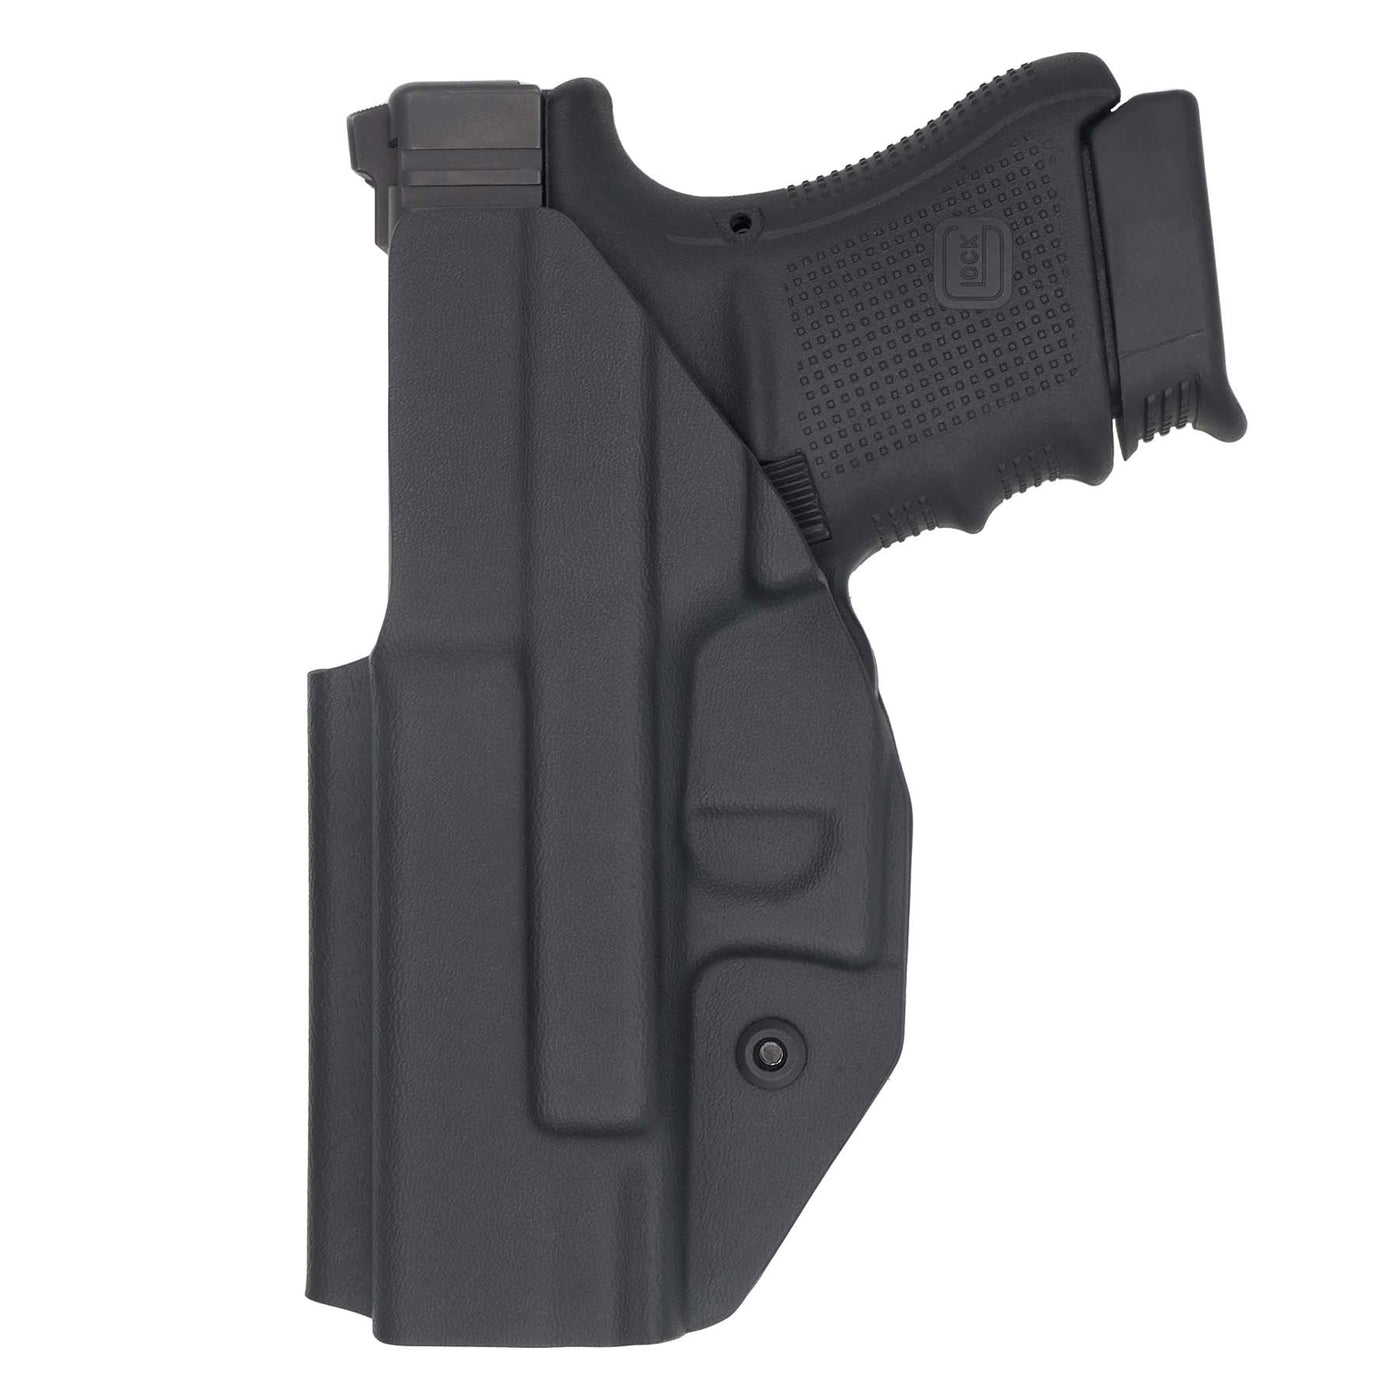 This is the rear of a custom C&G Holsters inside the waistband holster for the Glock 30sf.